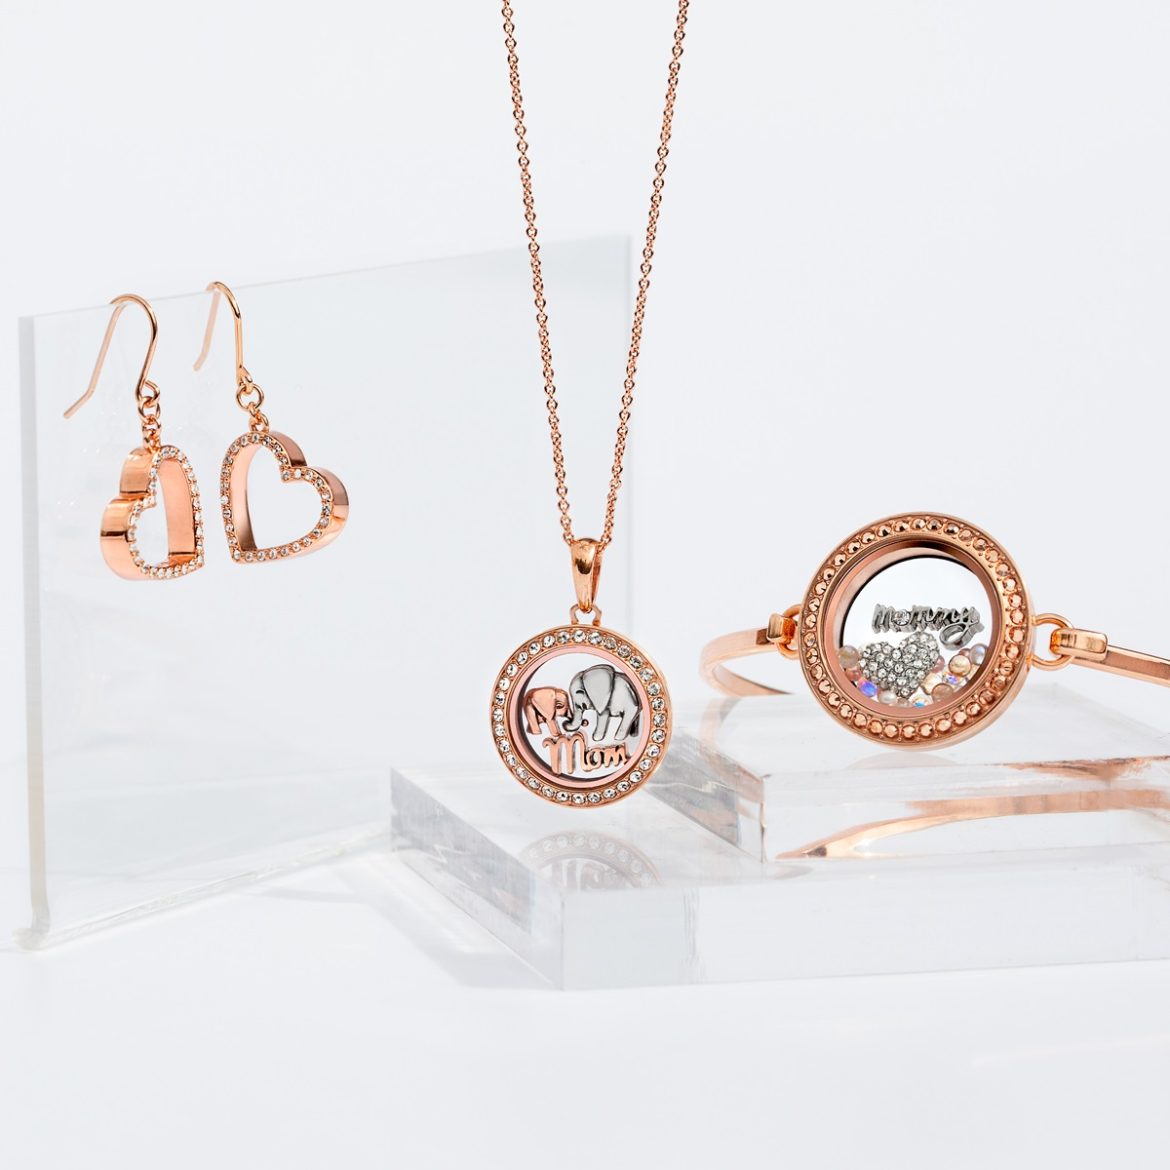 Origami Owl's Mother's Day Collection 2019 · life's little charms